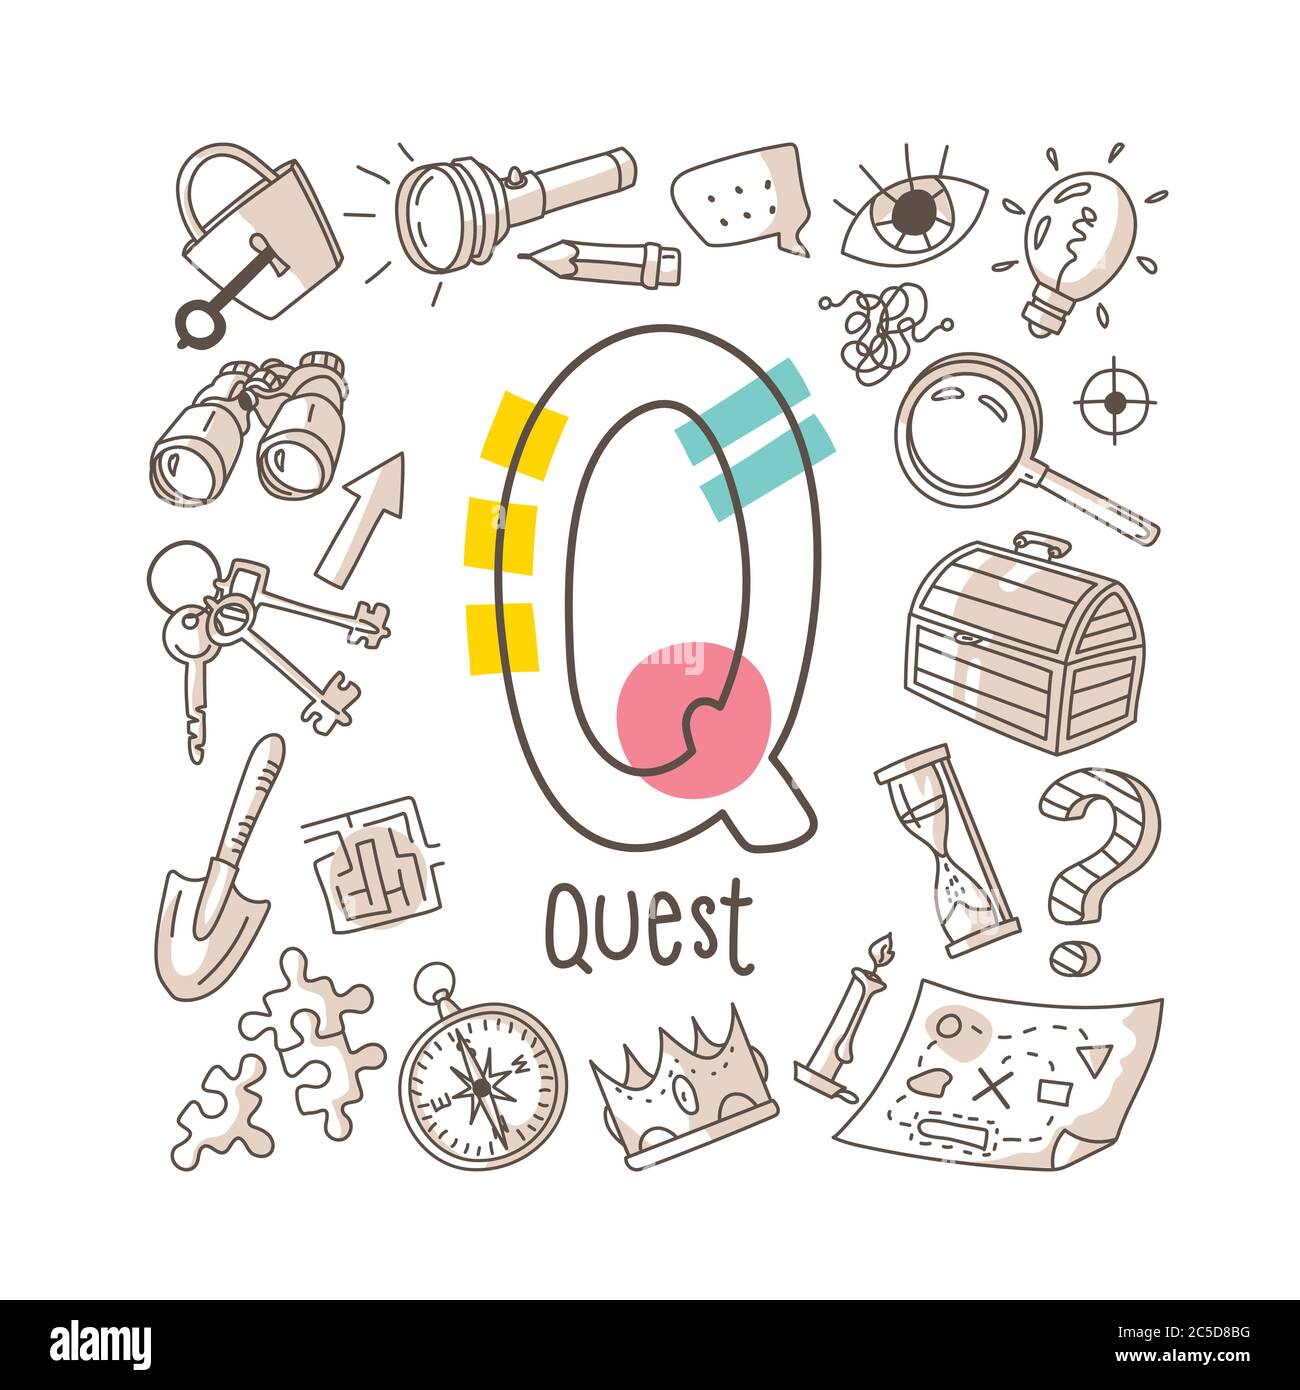 Letter Q - Quest, cute alphabet series in doodle style, vector illustration Stock Vector